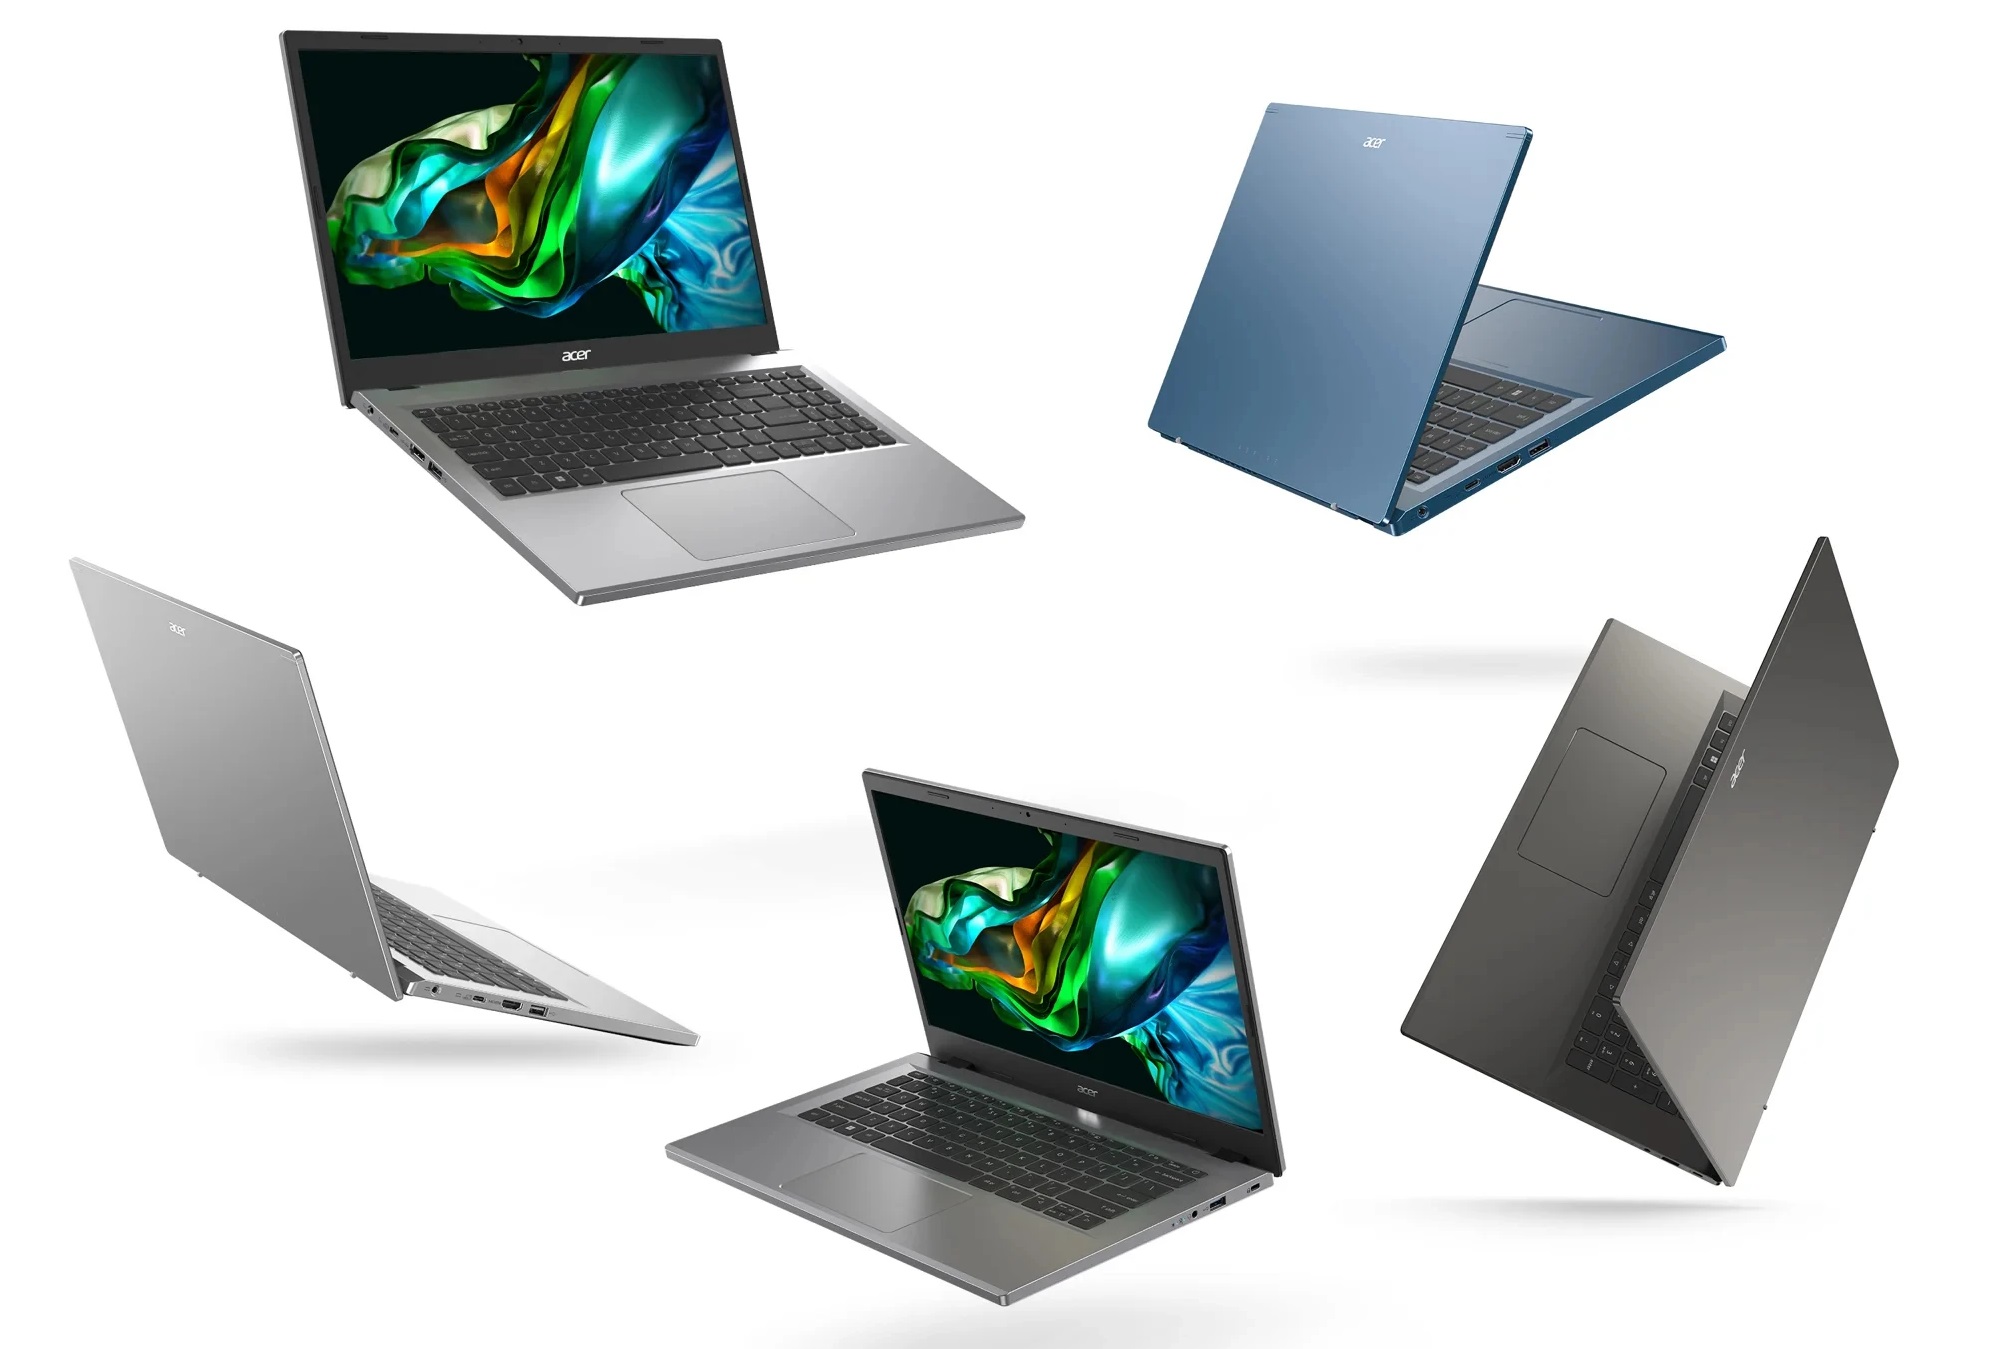 Acer introduced the new generation of Aspire monoblocks and notebooks priced from $349